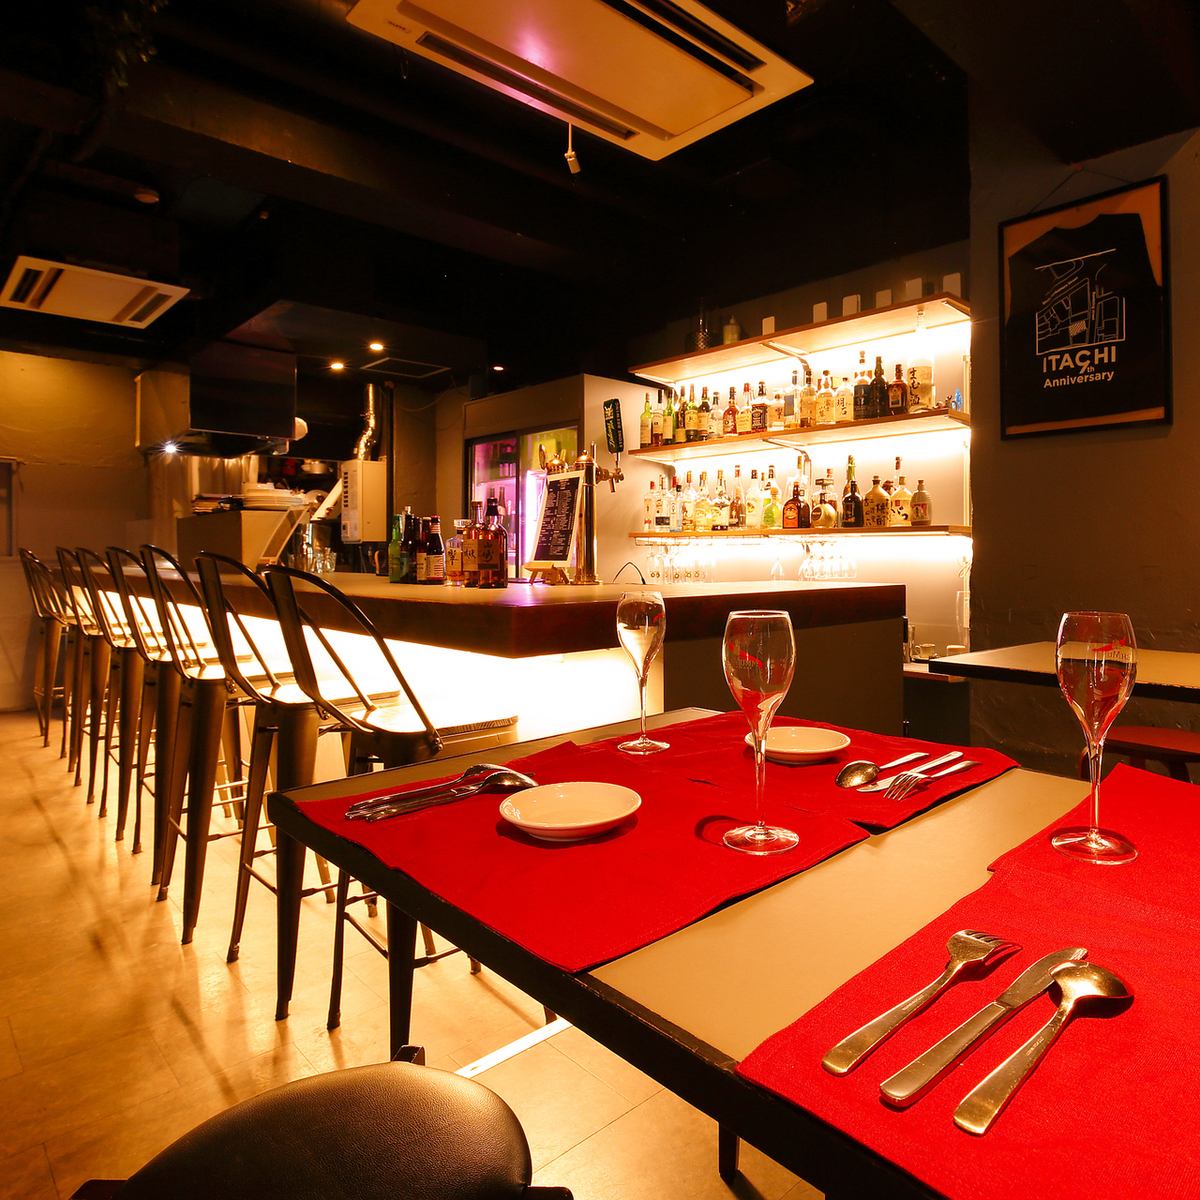 Course with all-you-can-drink for 4,500 yen/person for groups of 10 or more☆